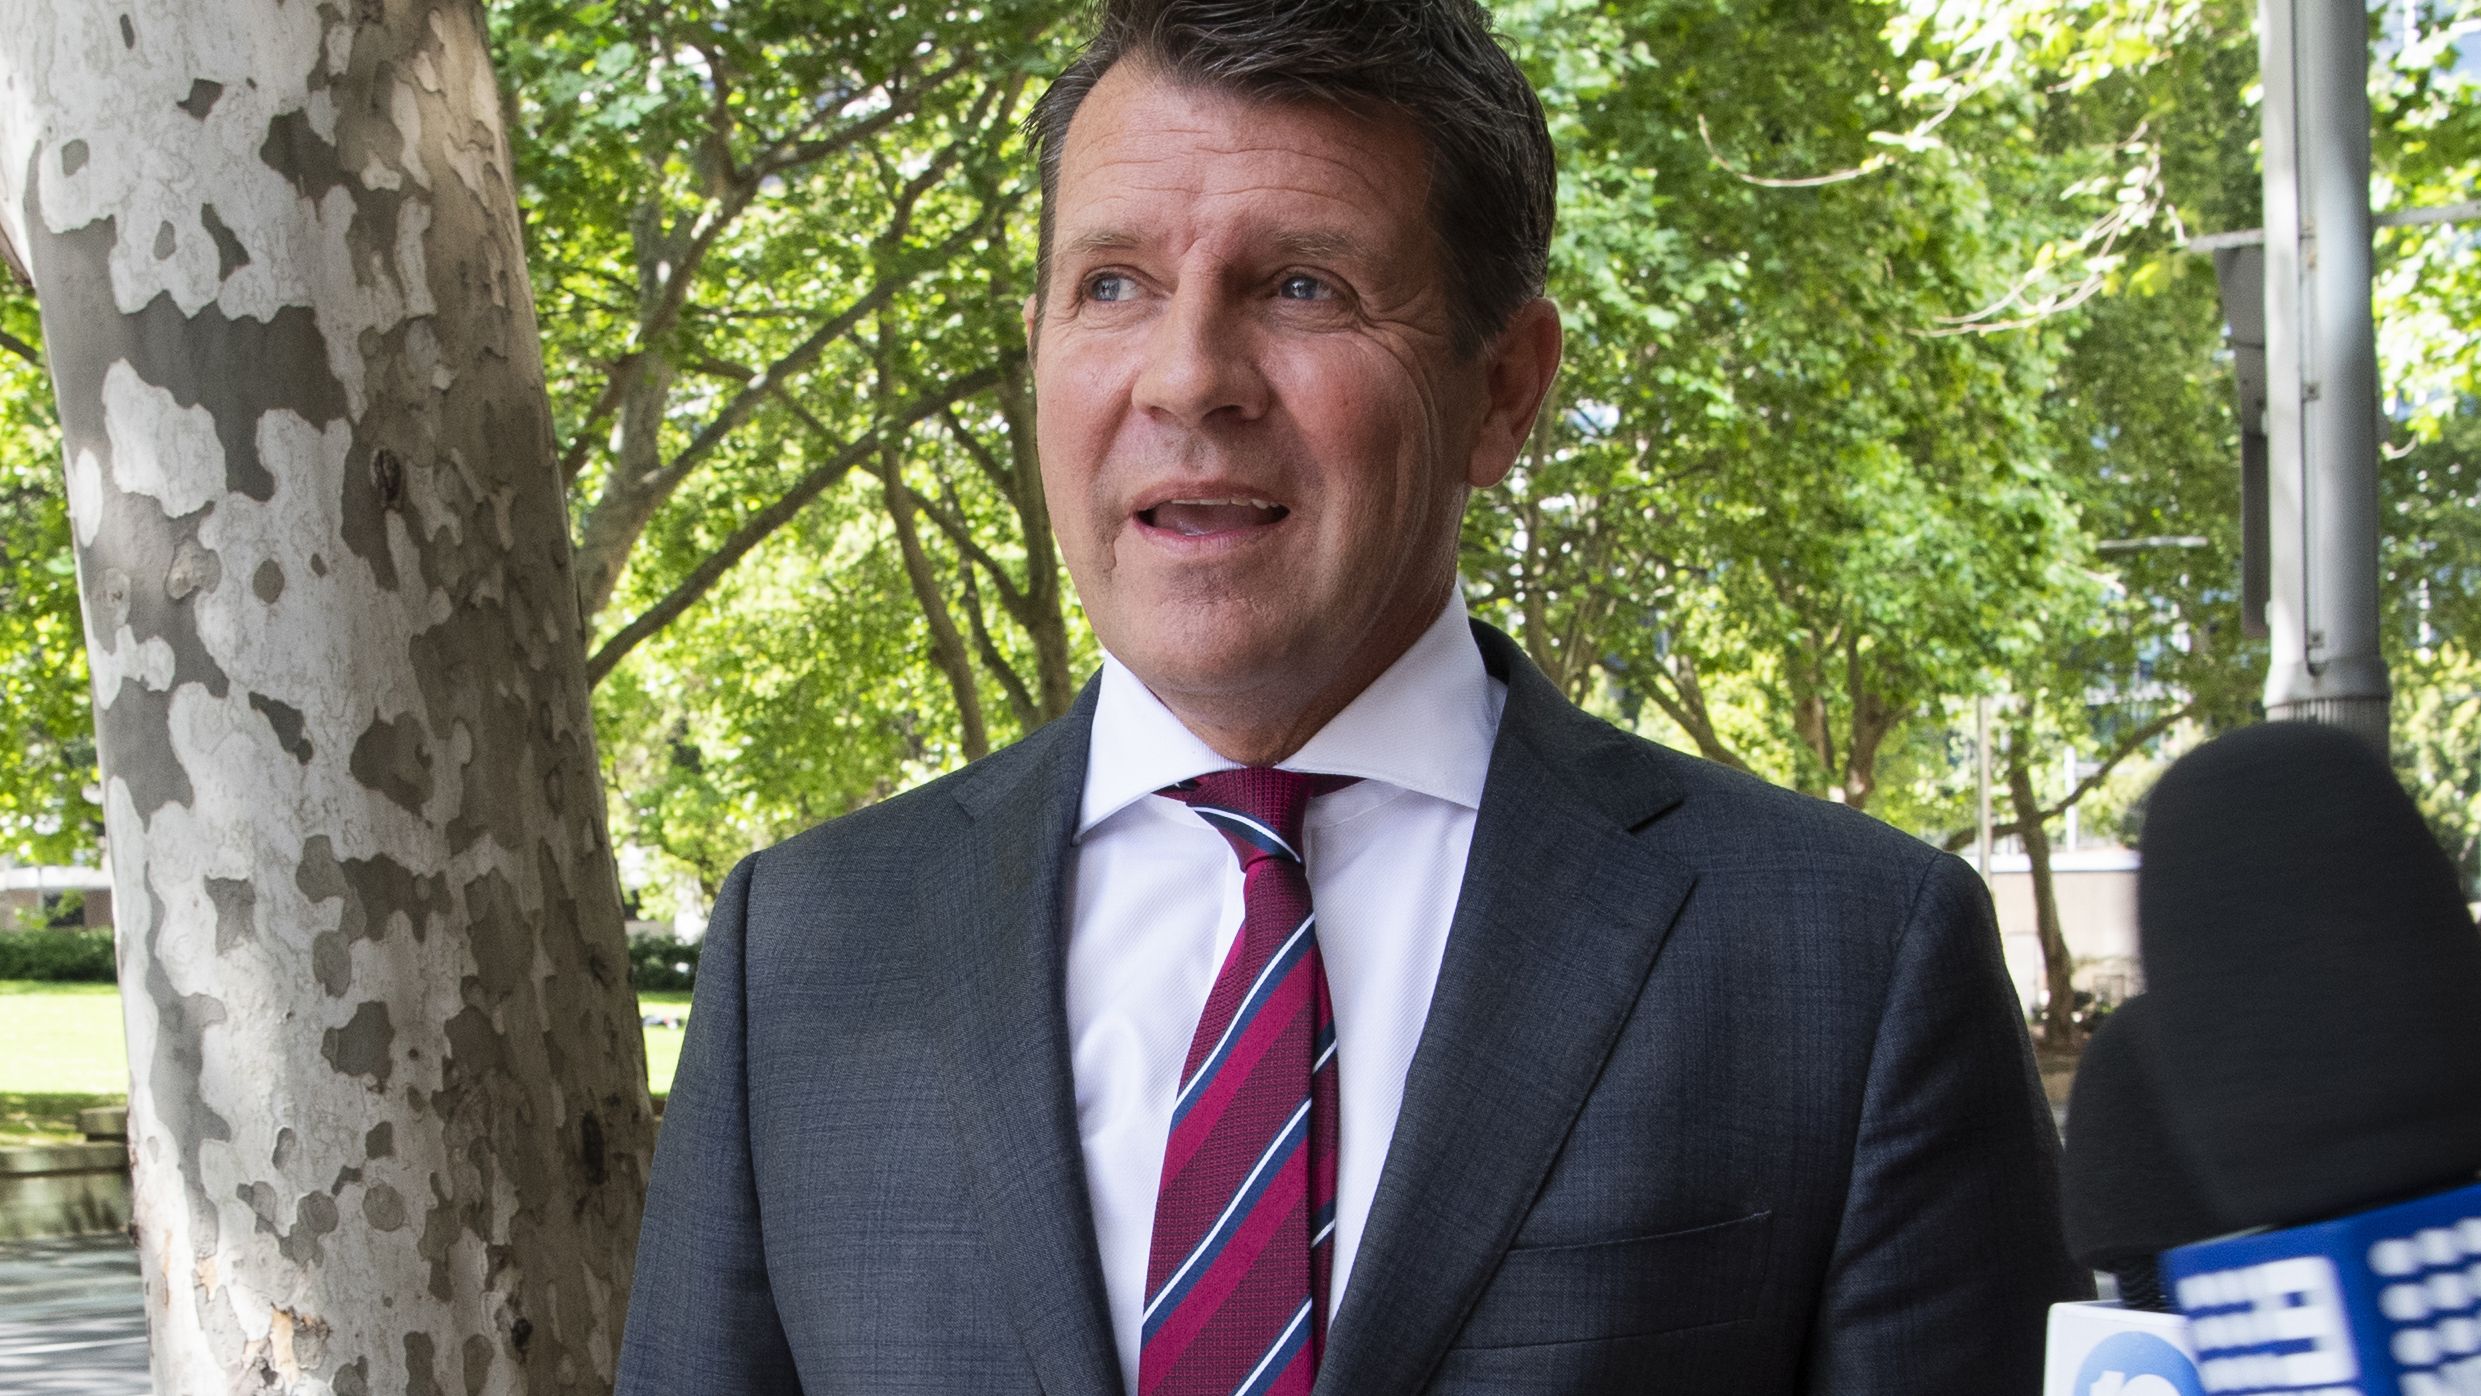 Former NSW premier Mike Baird arriving at ICAC to give evidence in a corruption inquiry investigating the conduct of former premier Gladys Berejiklian during her secret relationship with disgraced former MP Daryl Maguire. 